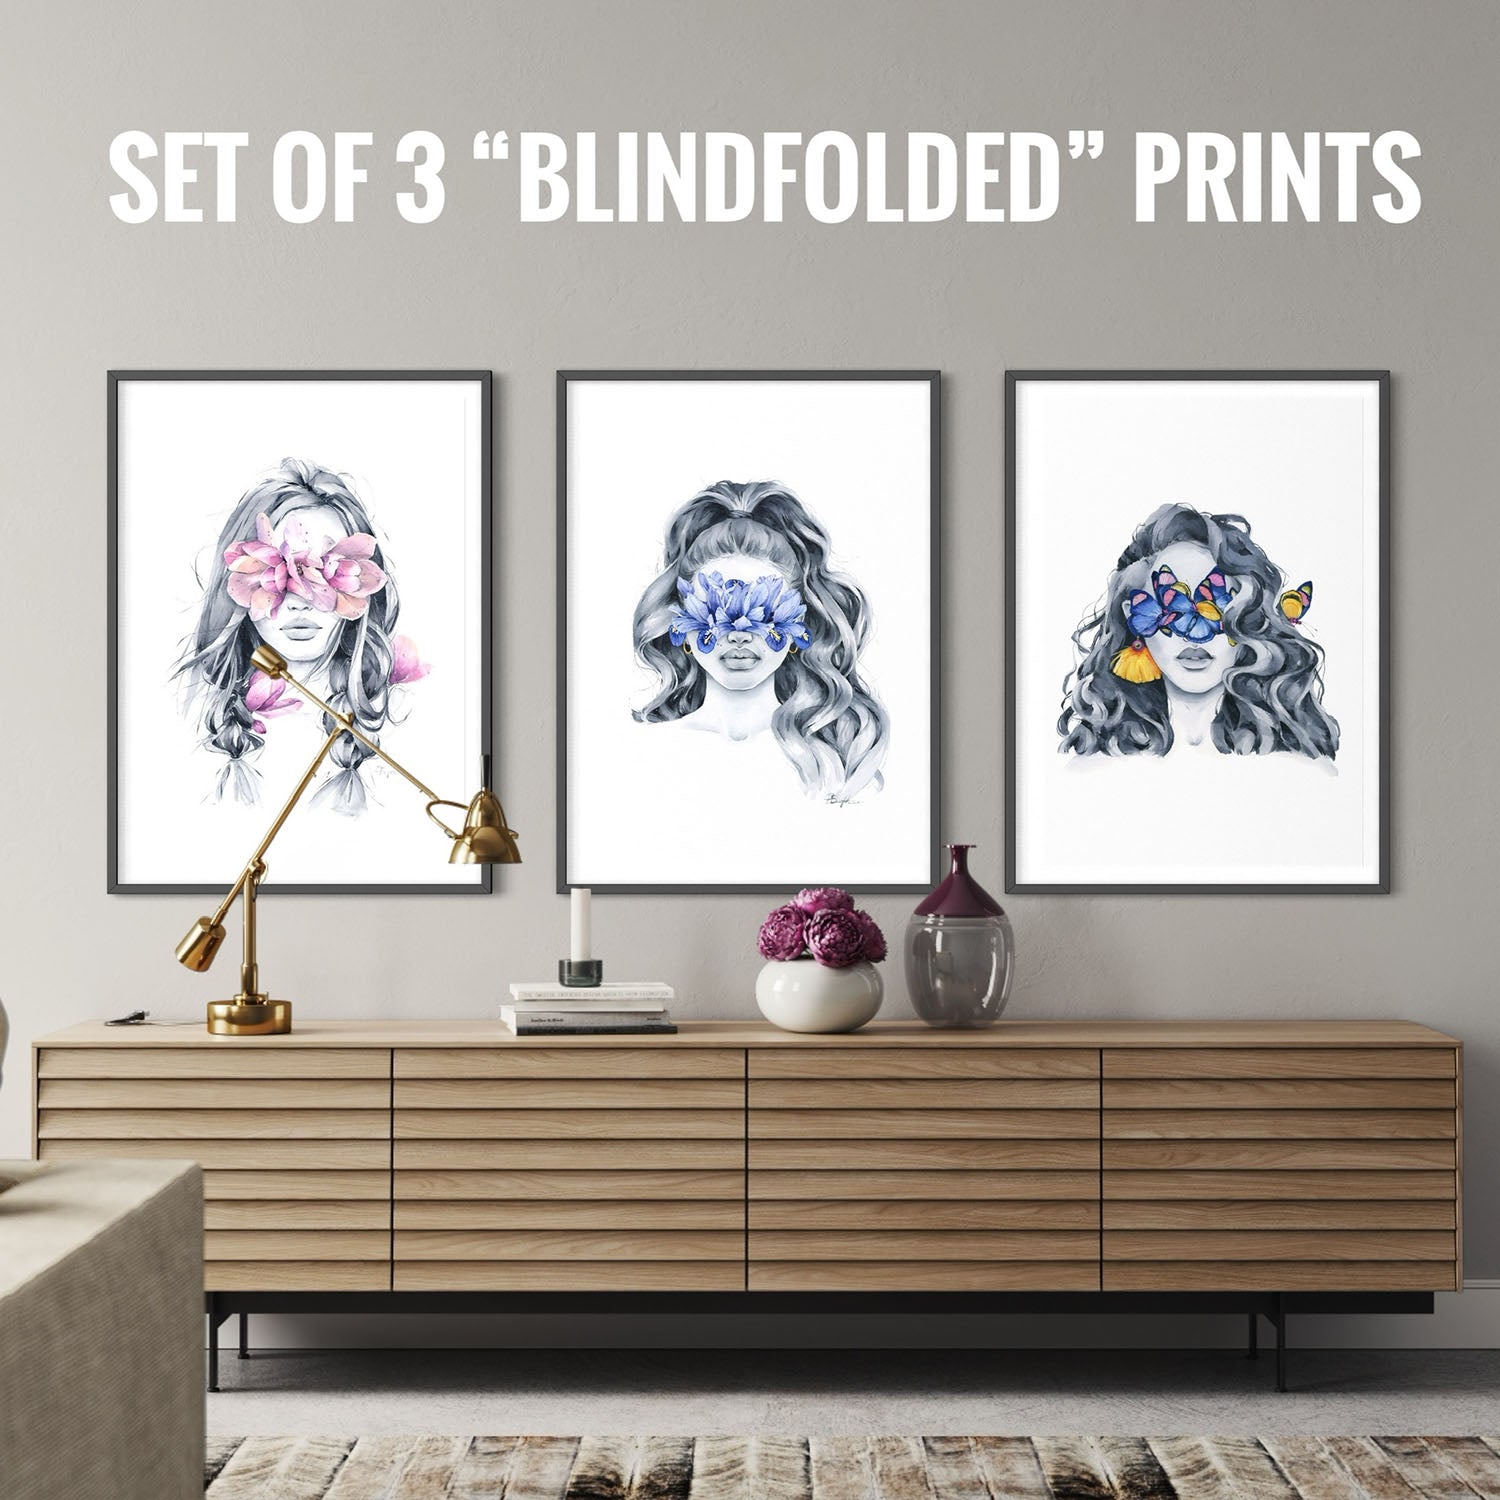 Set of 3 prints by Polina Bright